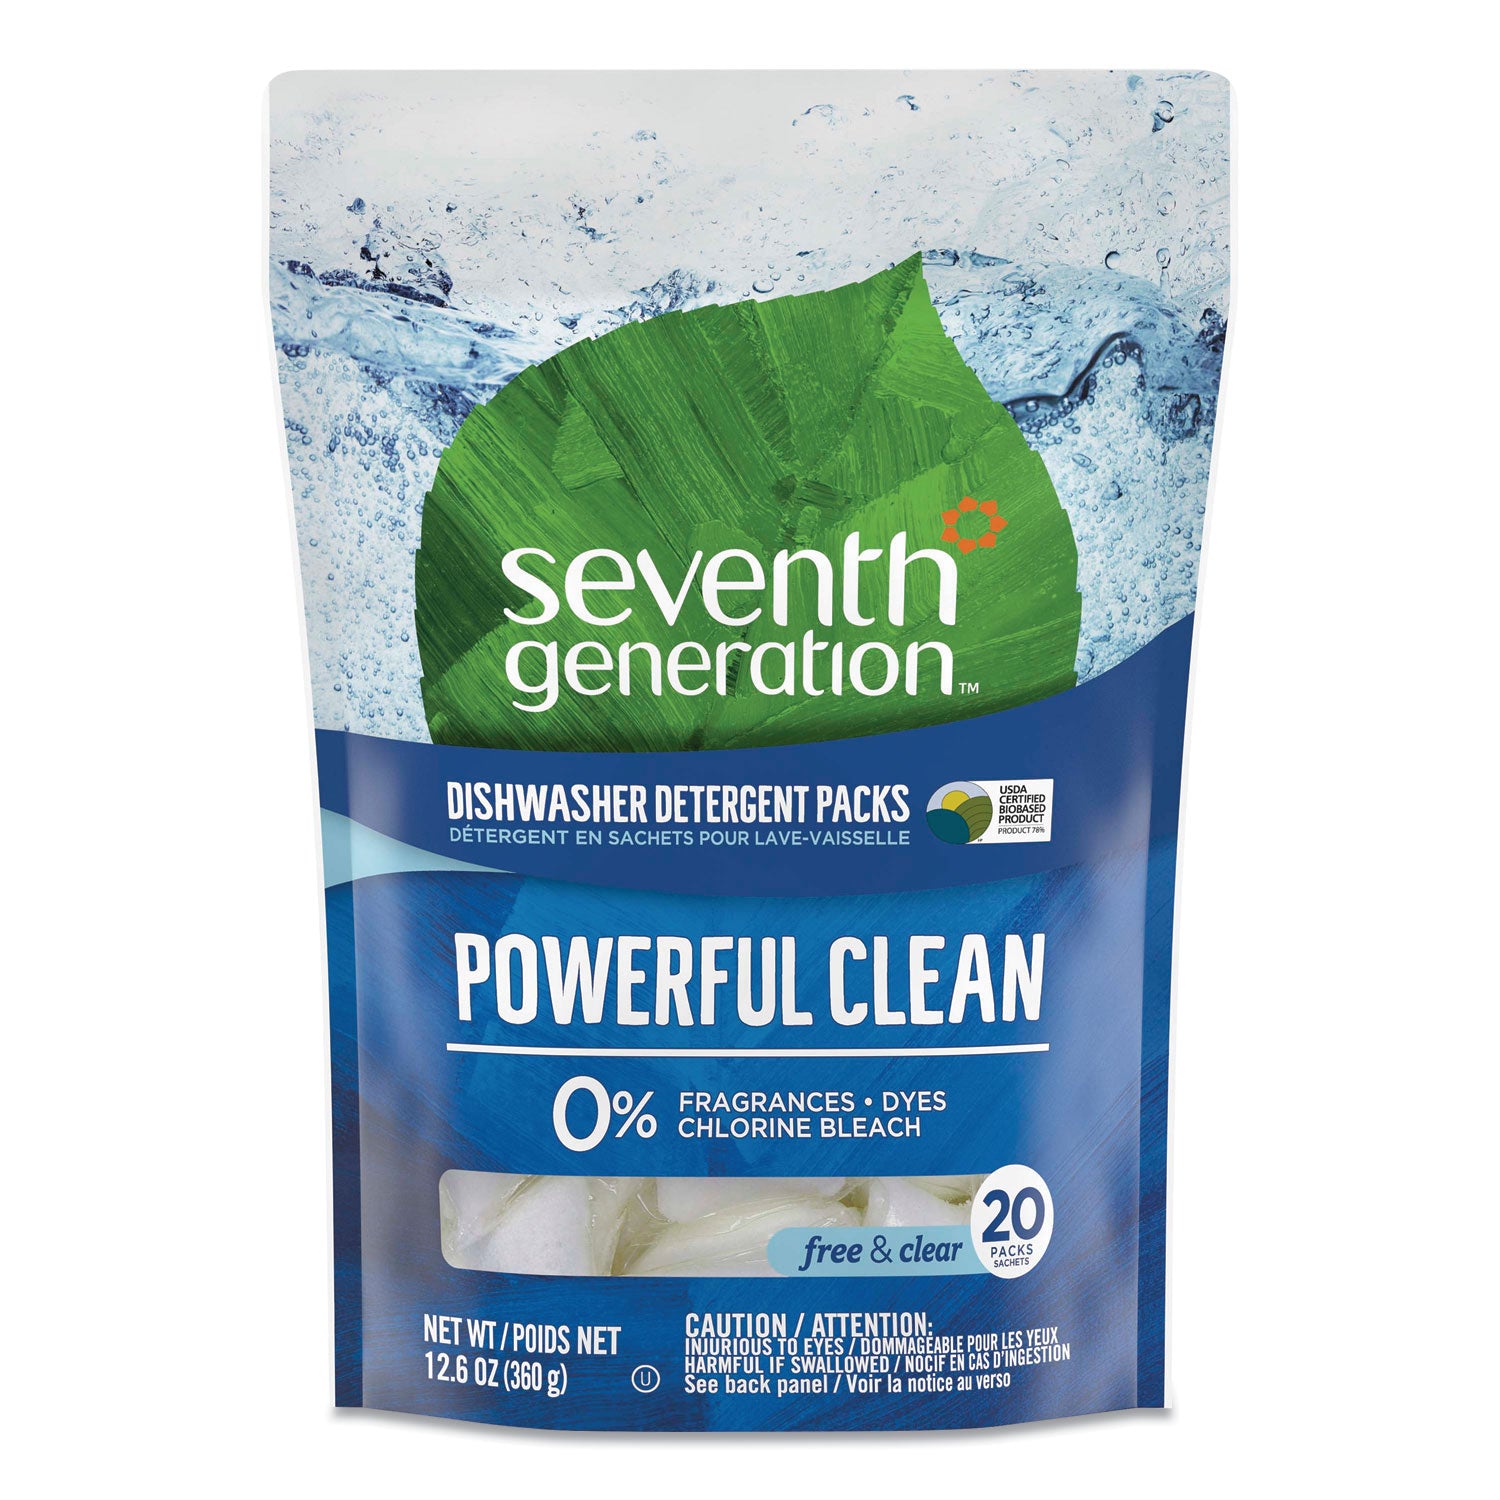 natural-automatic-dishwasher-detergent-packs-free-and-clear-45-powder-packets-box-5-boxes-carton_sev45180ct - 1